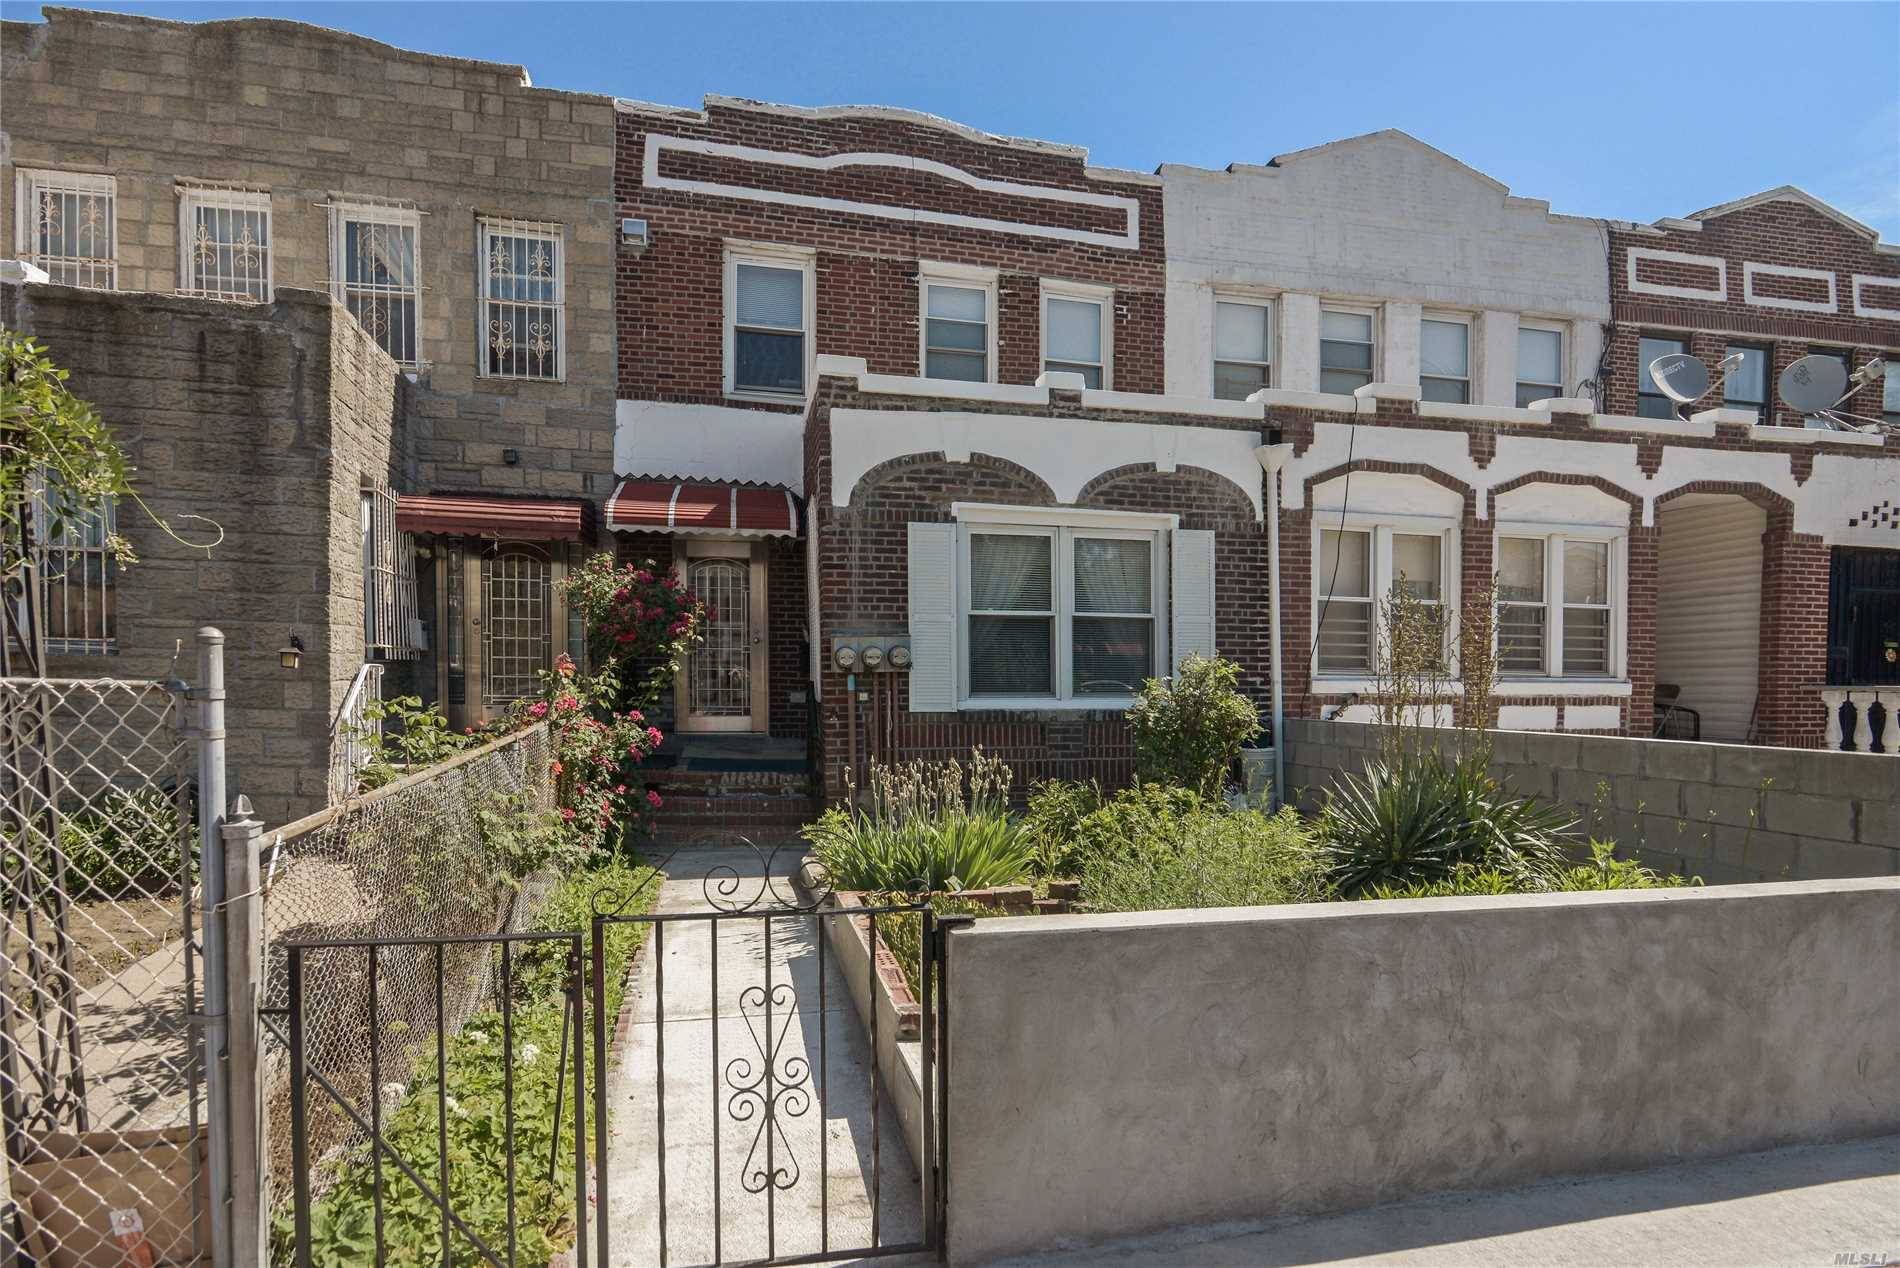 Family Brick-Faced Townhouse In The Heart Of Woodside.